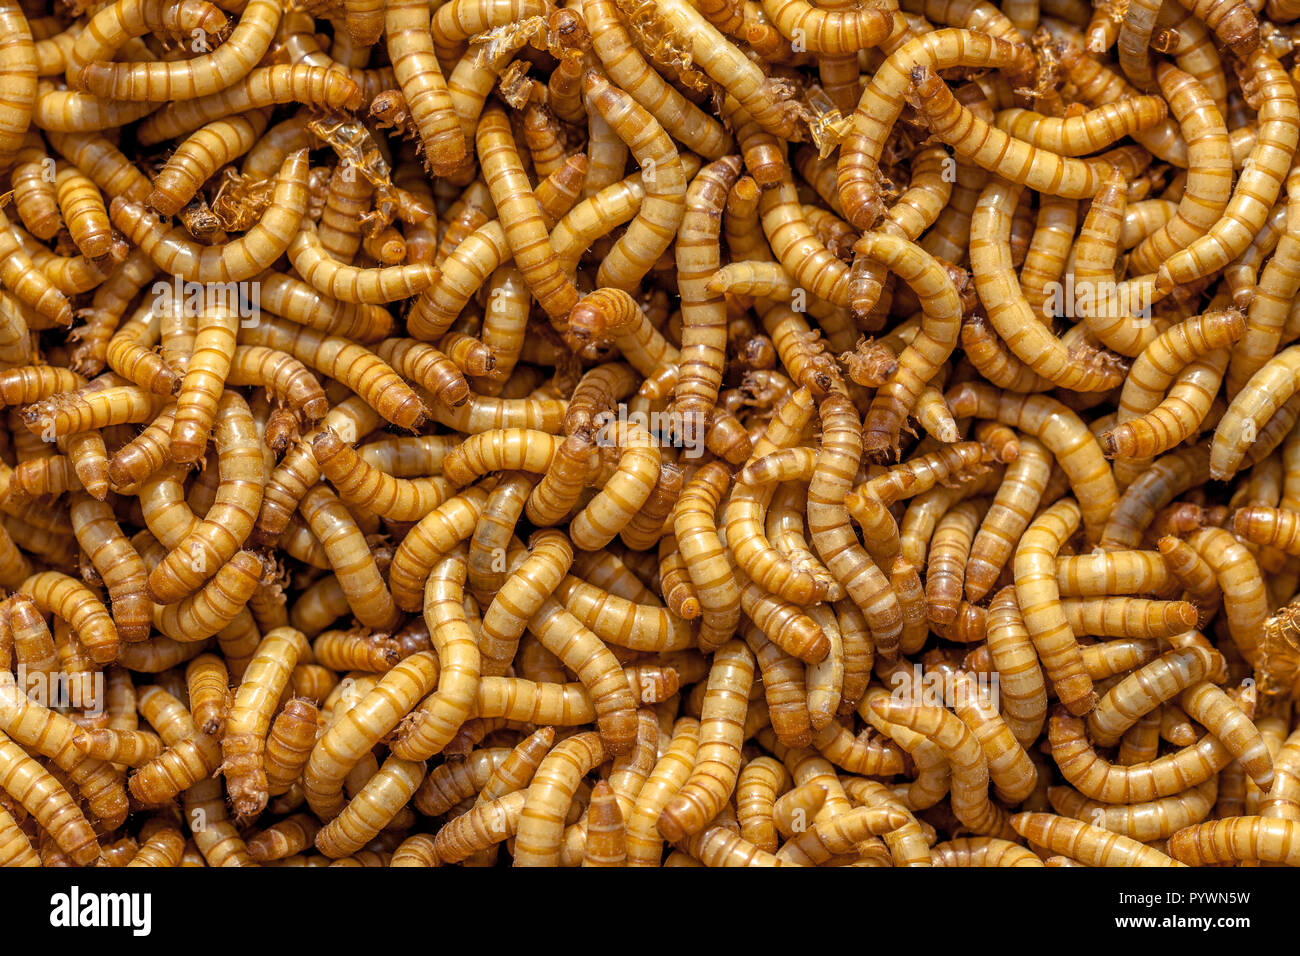 Background of many living Mealworms suitable for Food Stock Photo